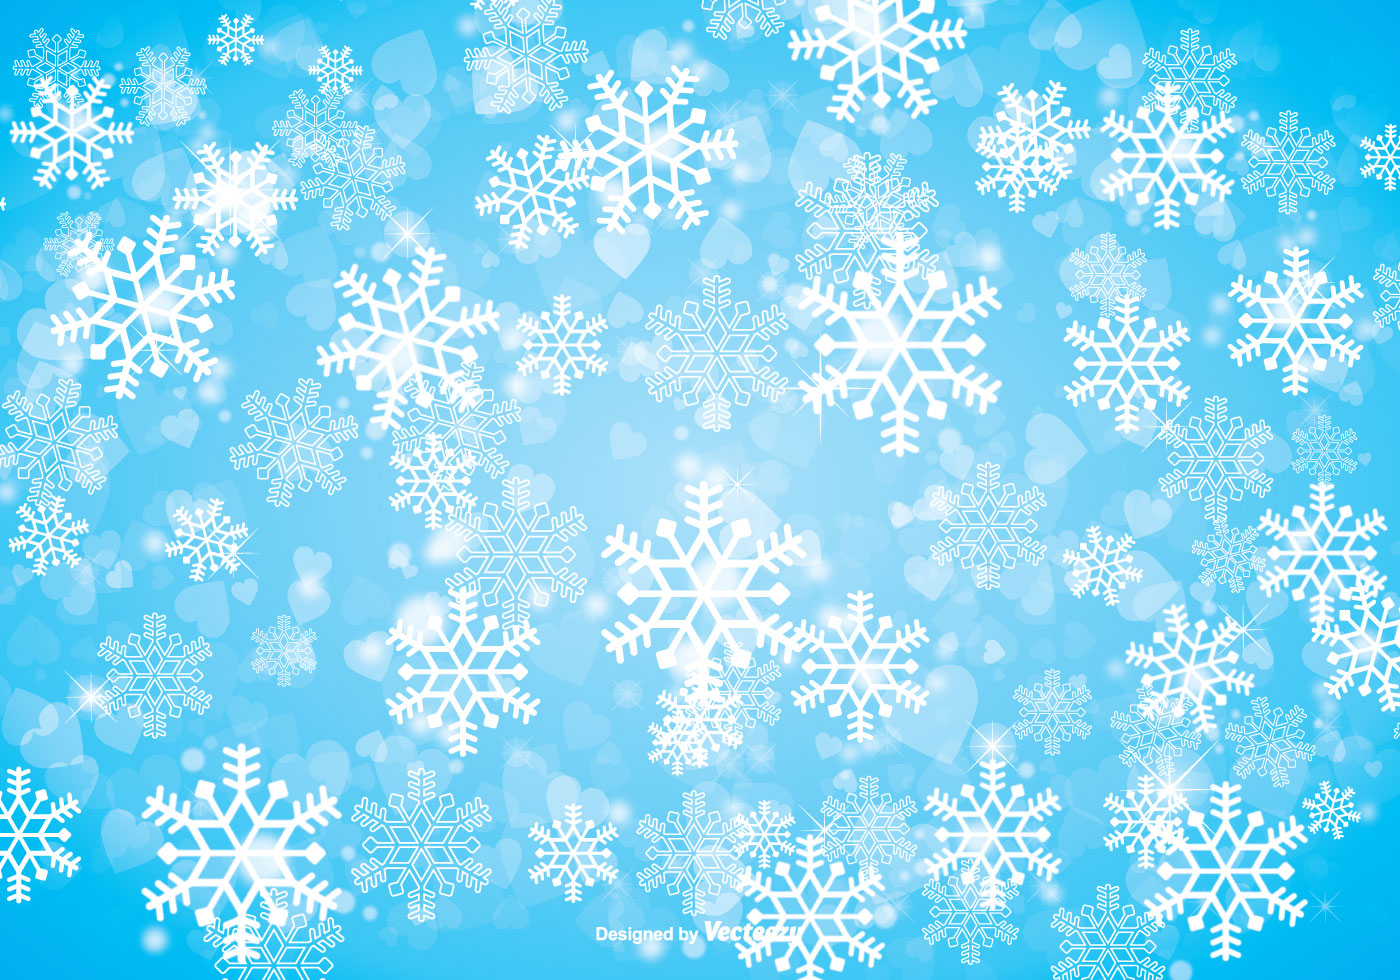 free clipart winter background - photo #15